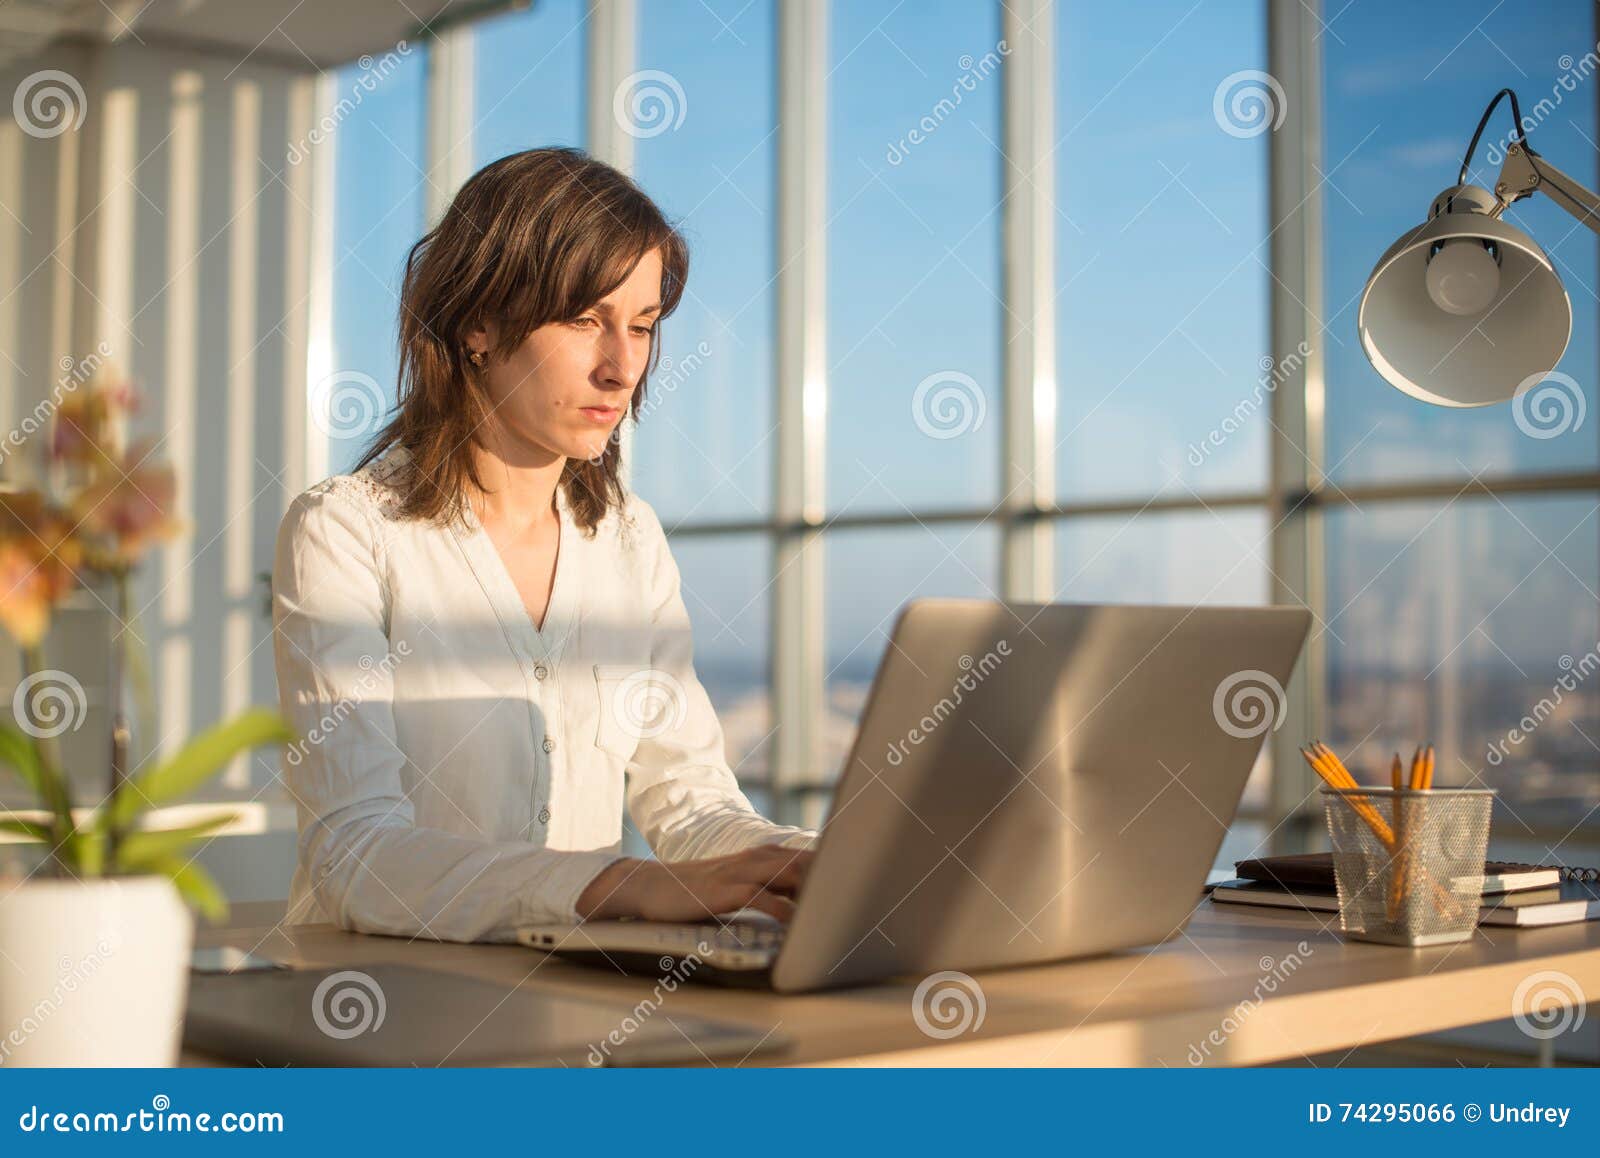 female teleworker texting using laptop and internet, working online. freelancer typing at home office, workplace.